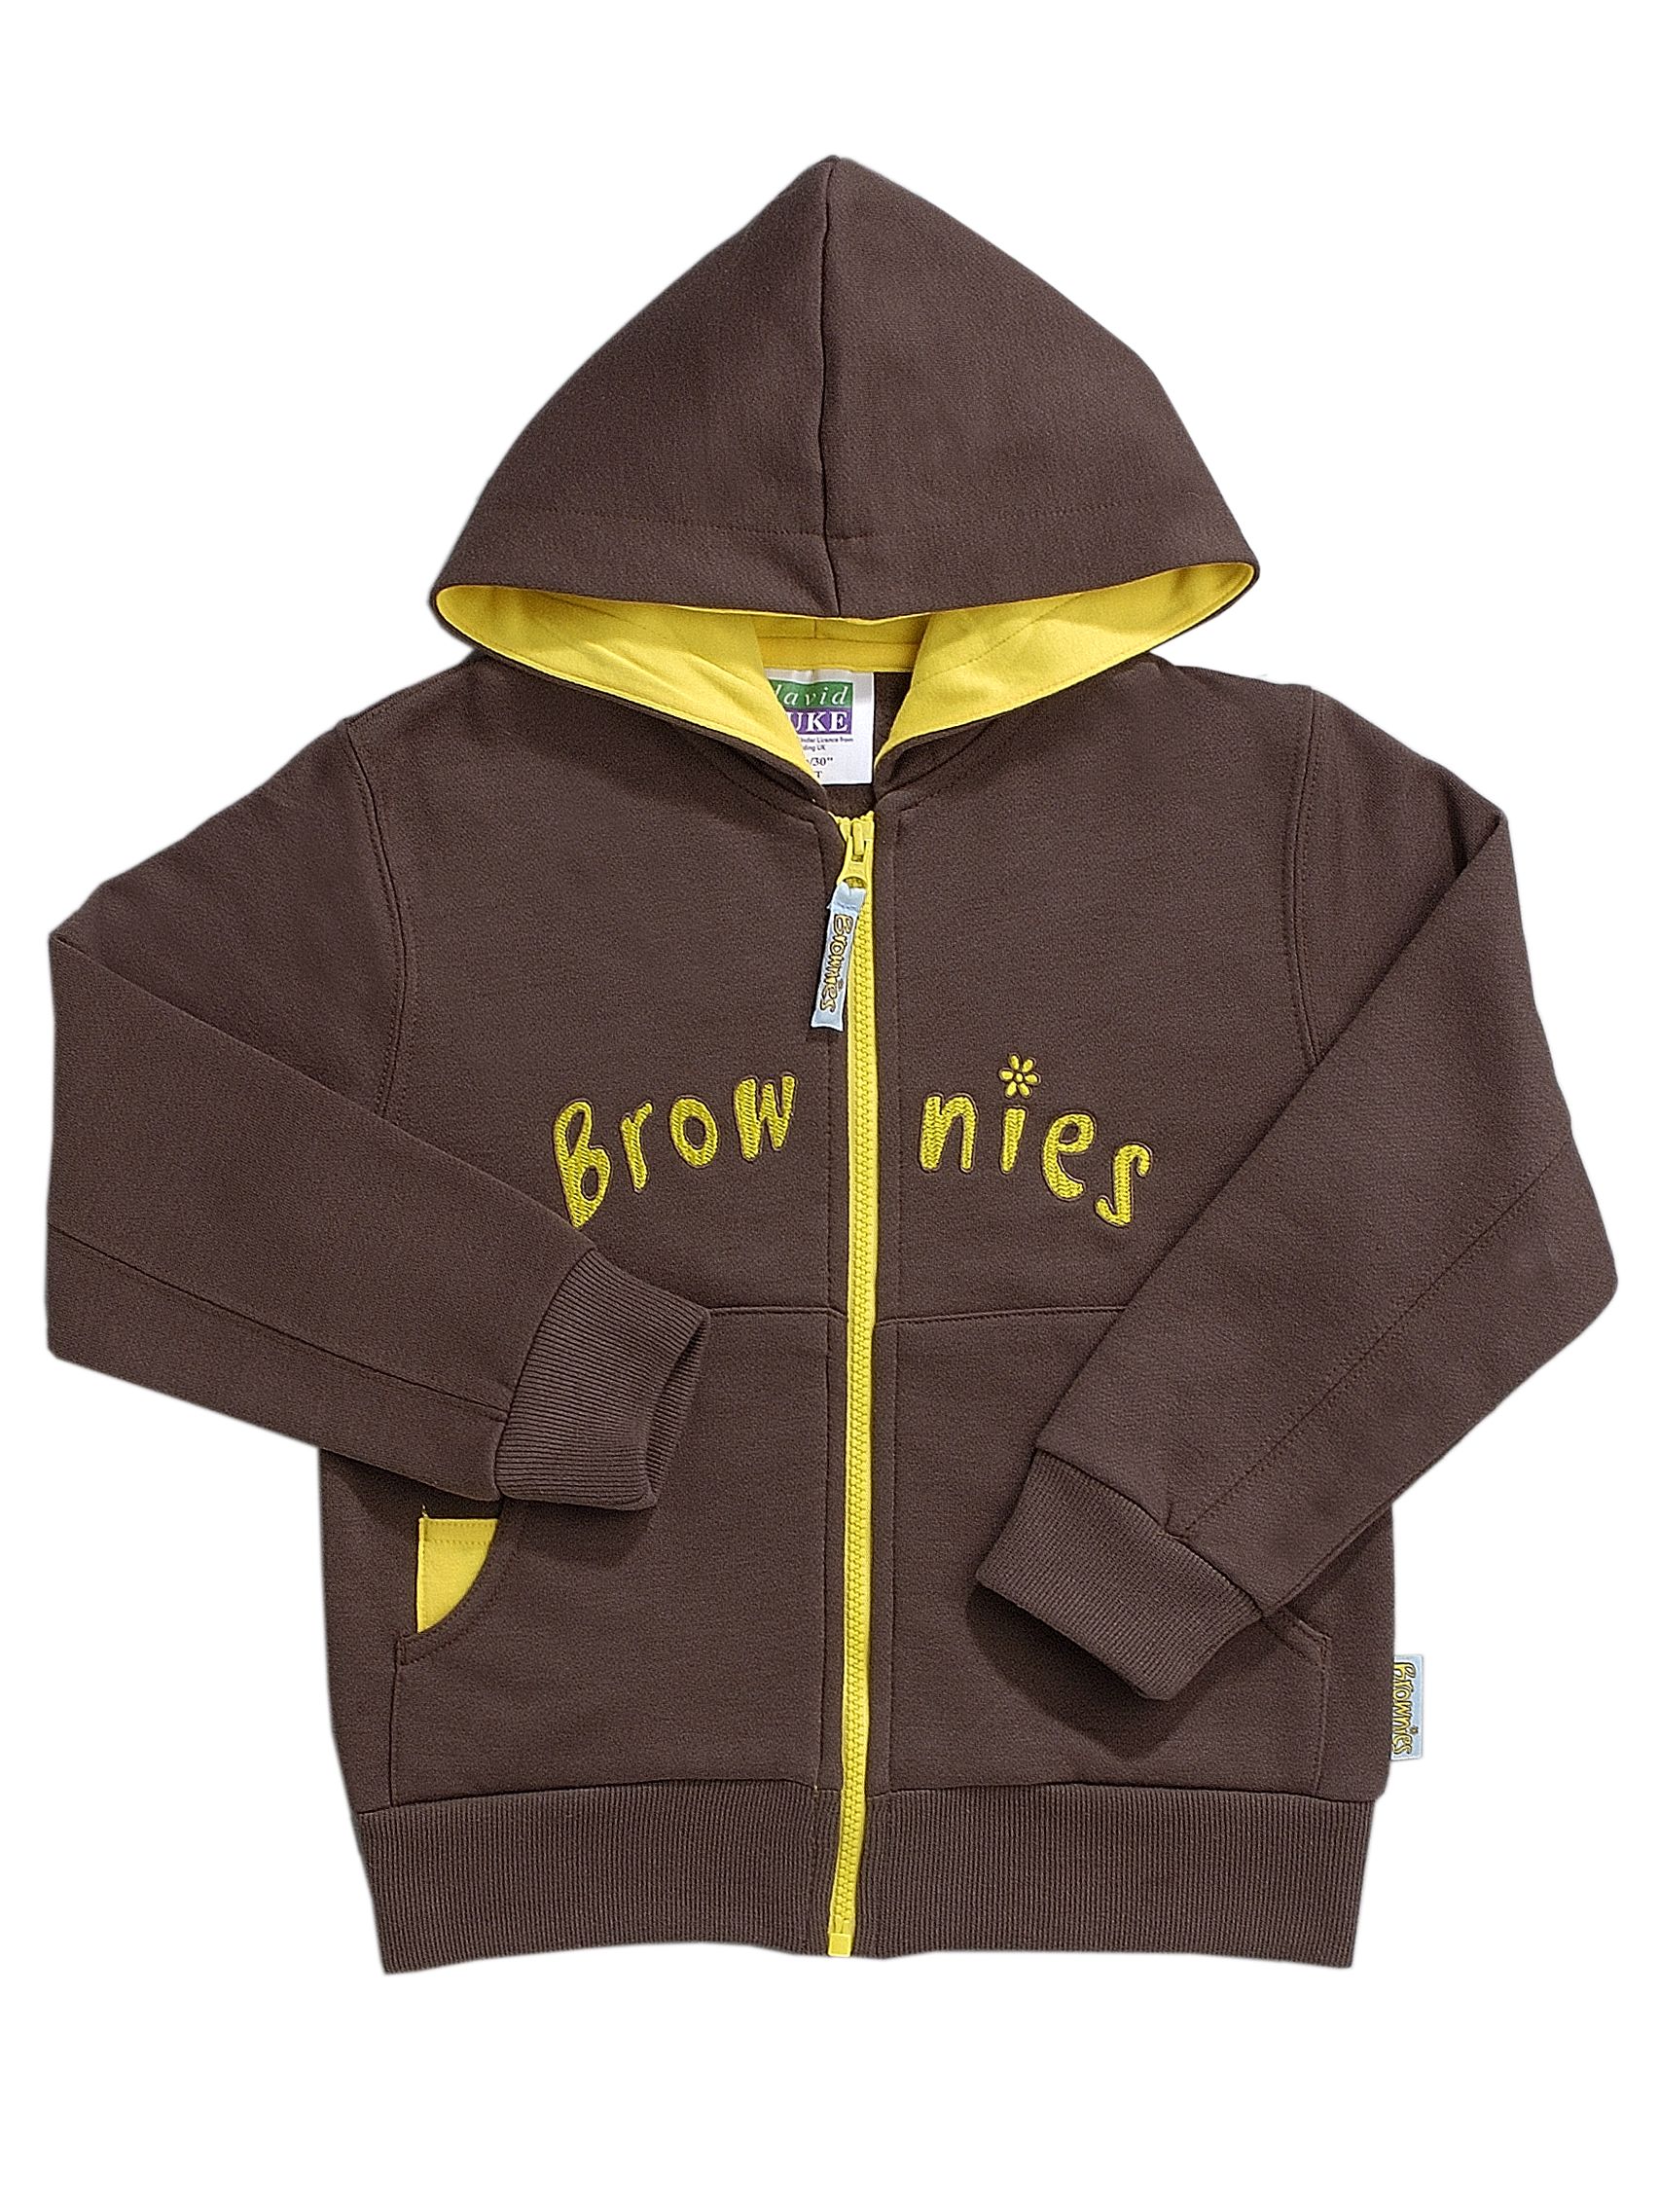 Unbranded Brownies Hooded Zipped Top, Chest 86cm